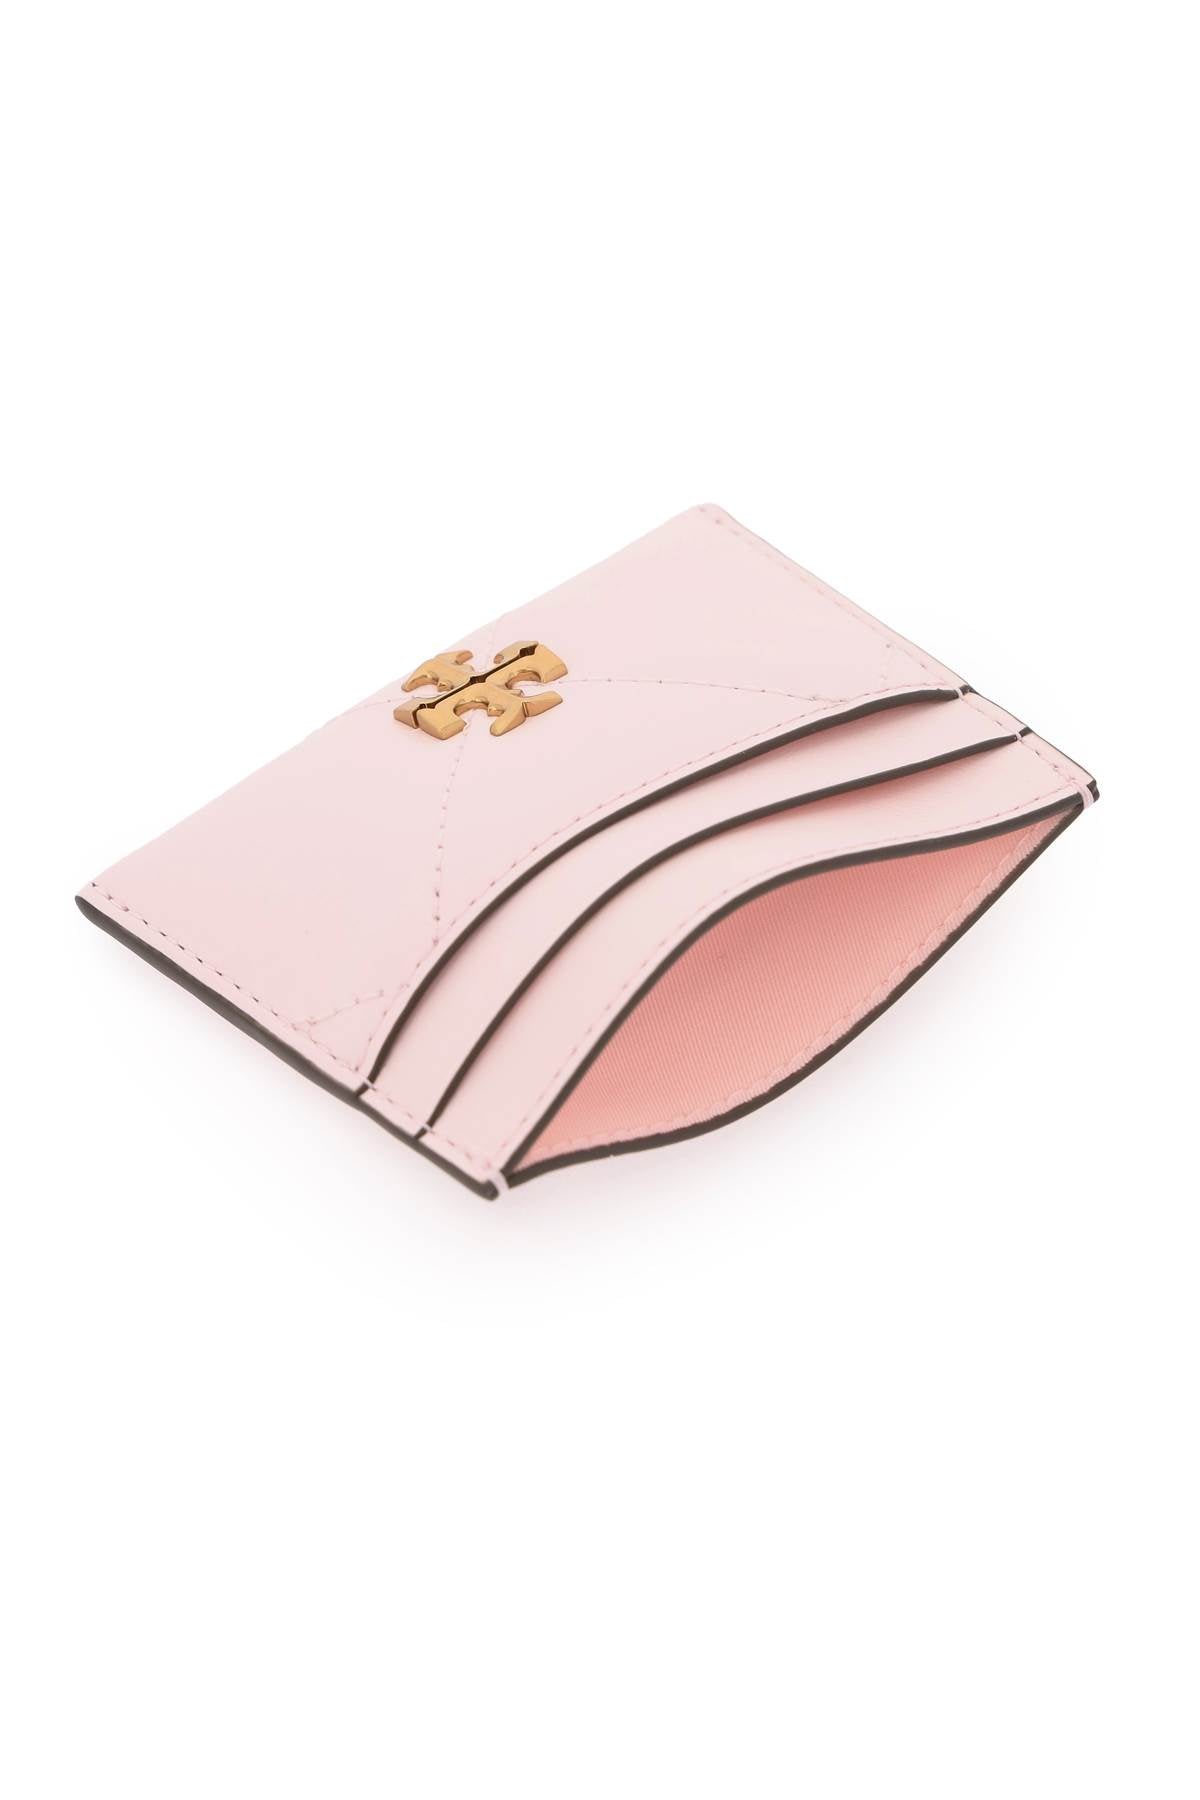 Tory Burch Tory burch kira card holder with trapezoid